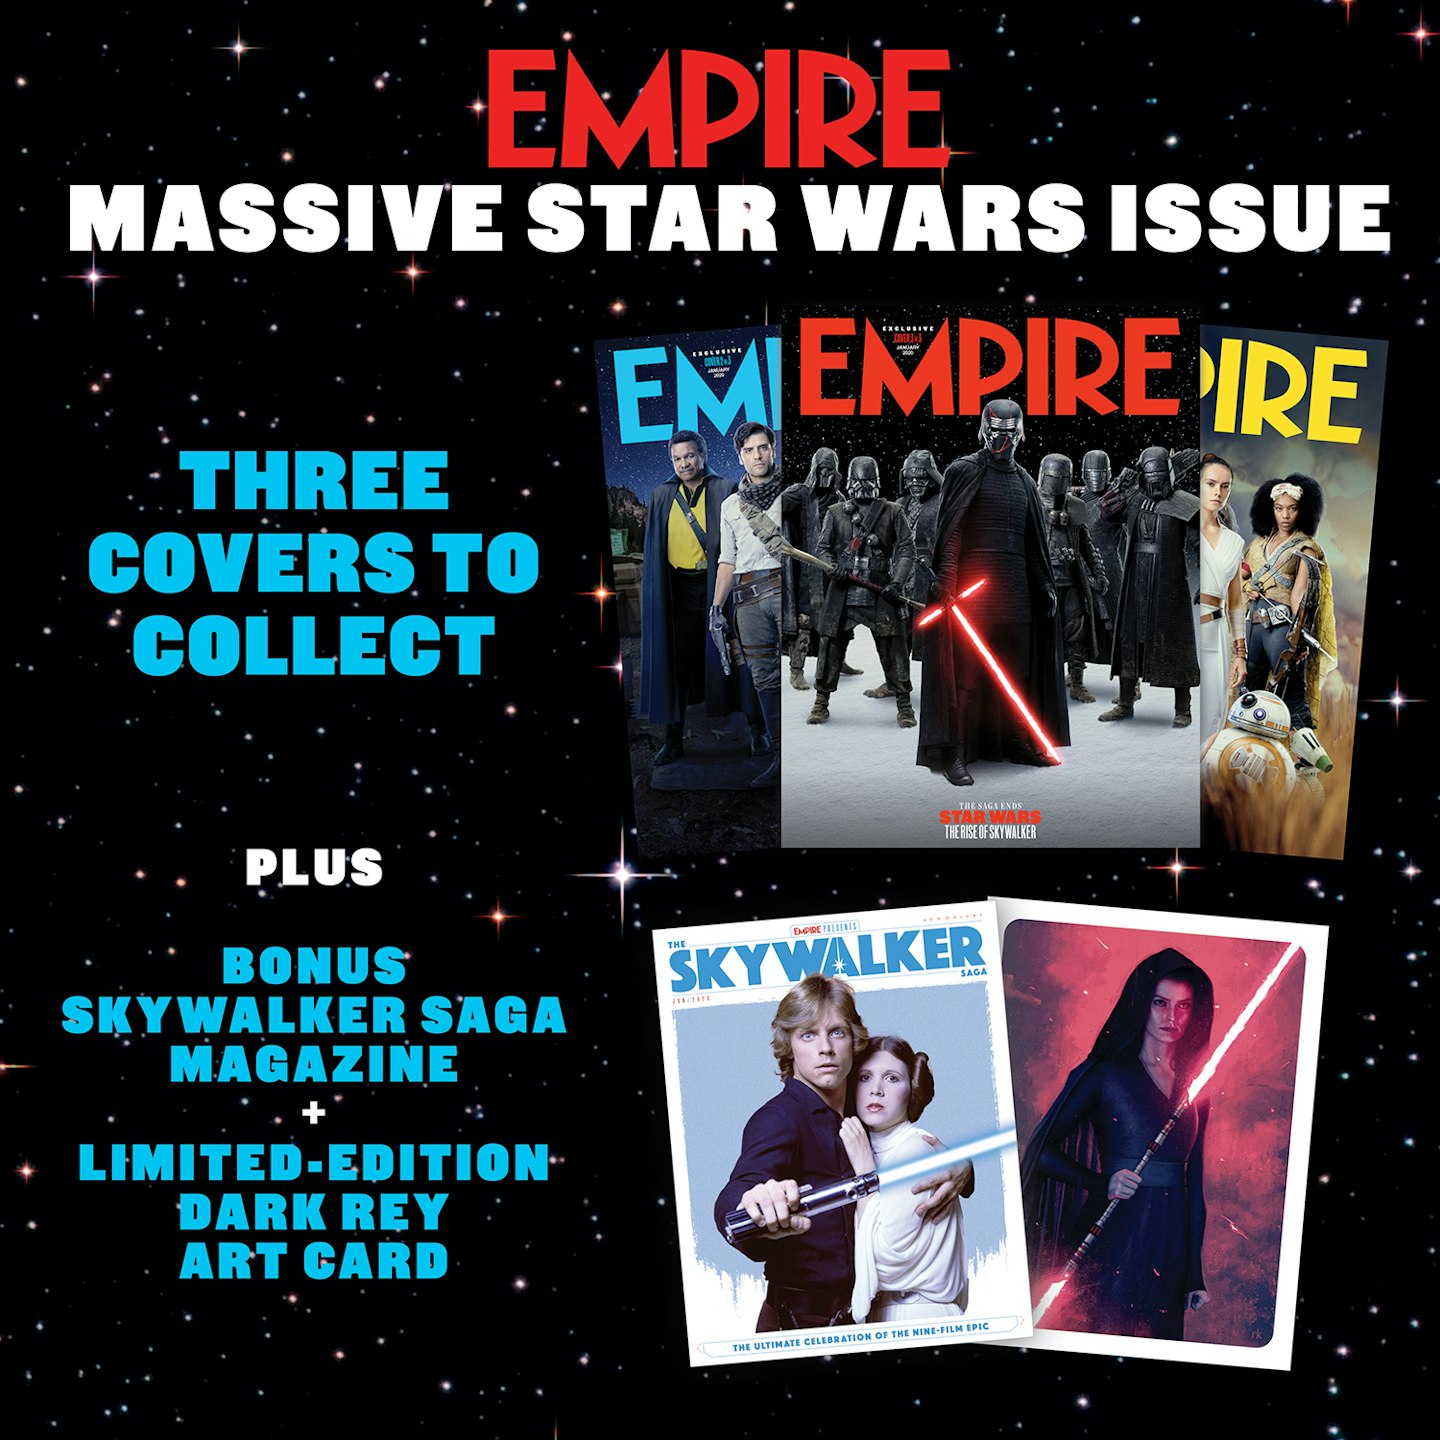 Star Wars Rise Of Skywalker – Empire issue package